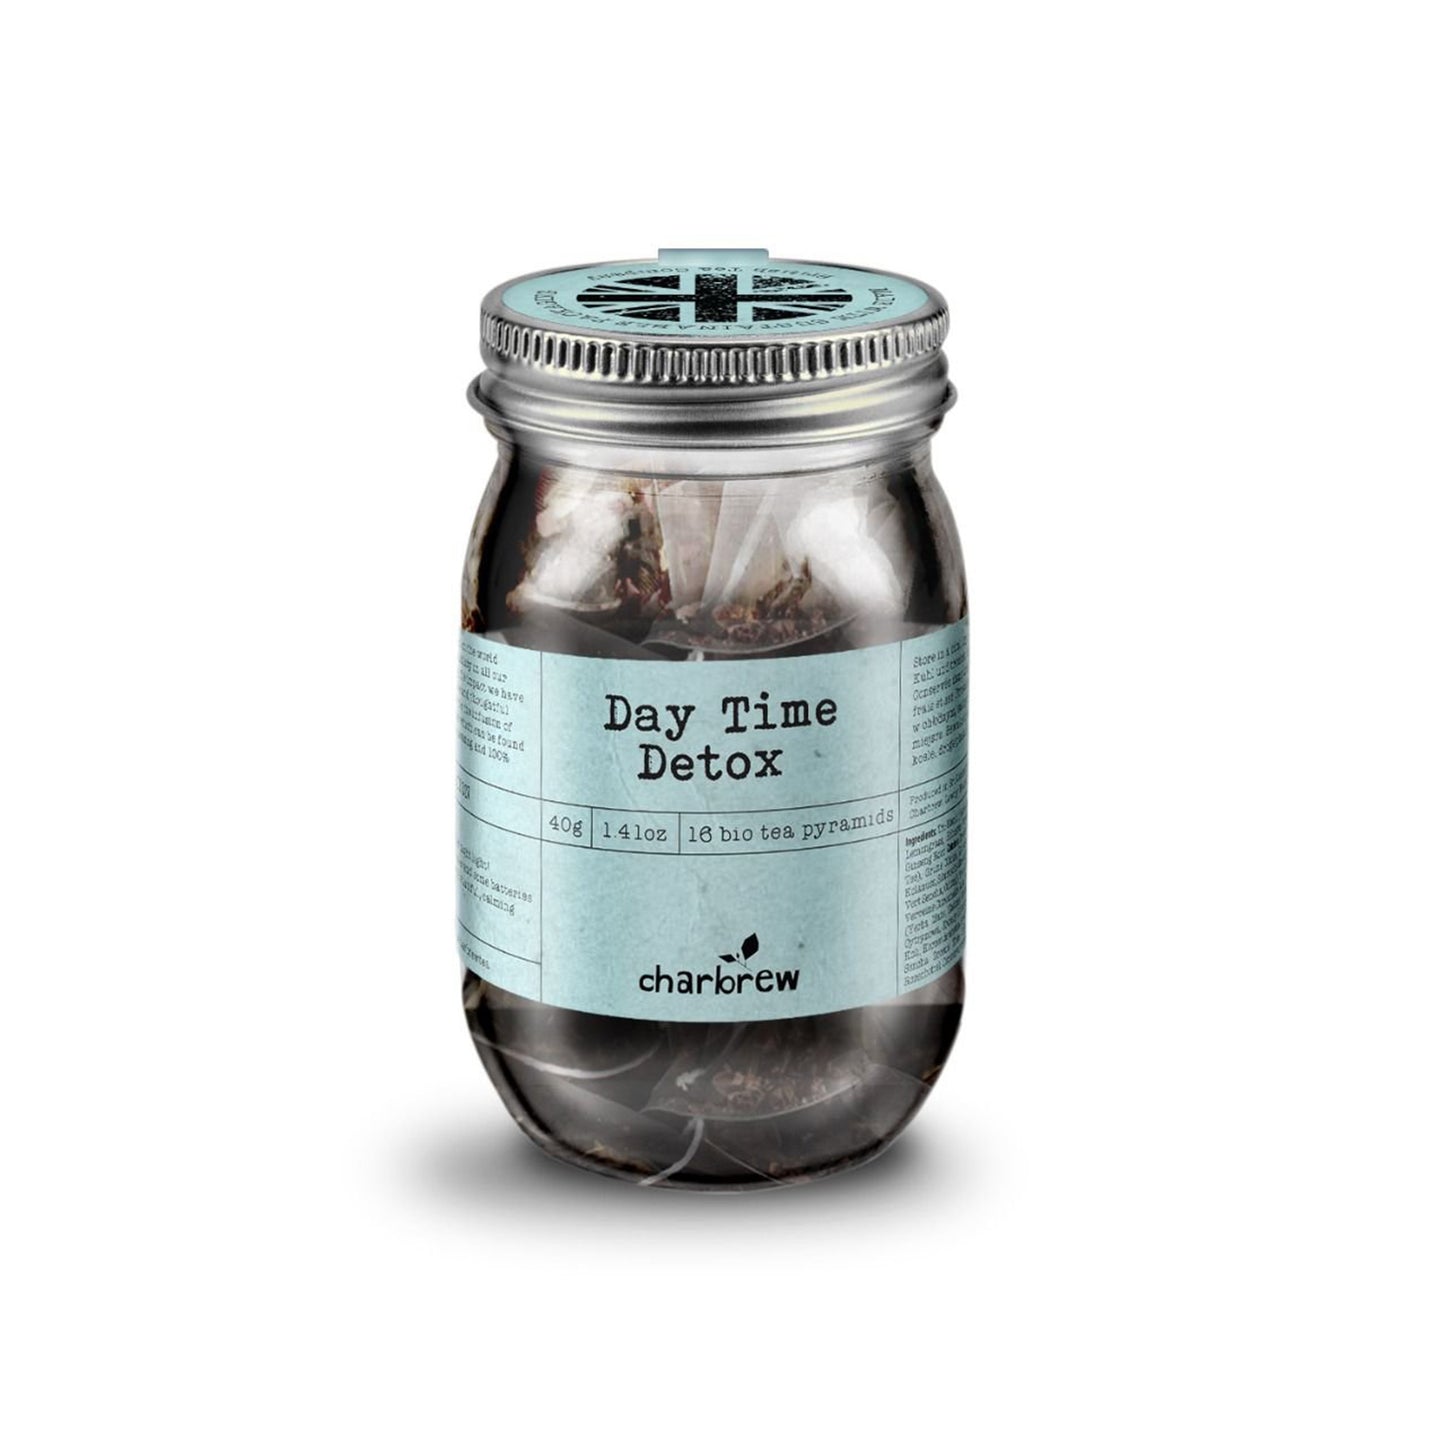 Charbrew carefully crafted day time tea in re-usable mason jar